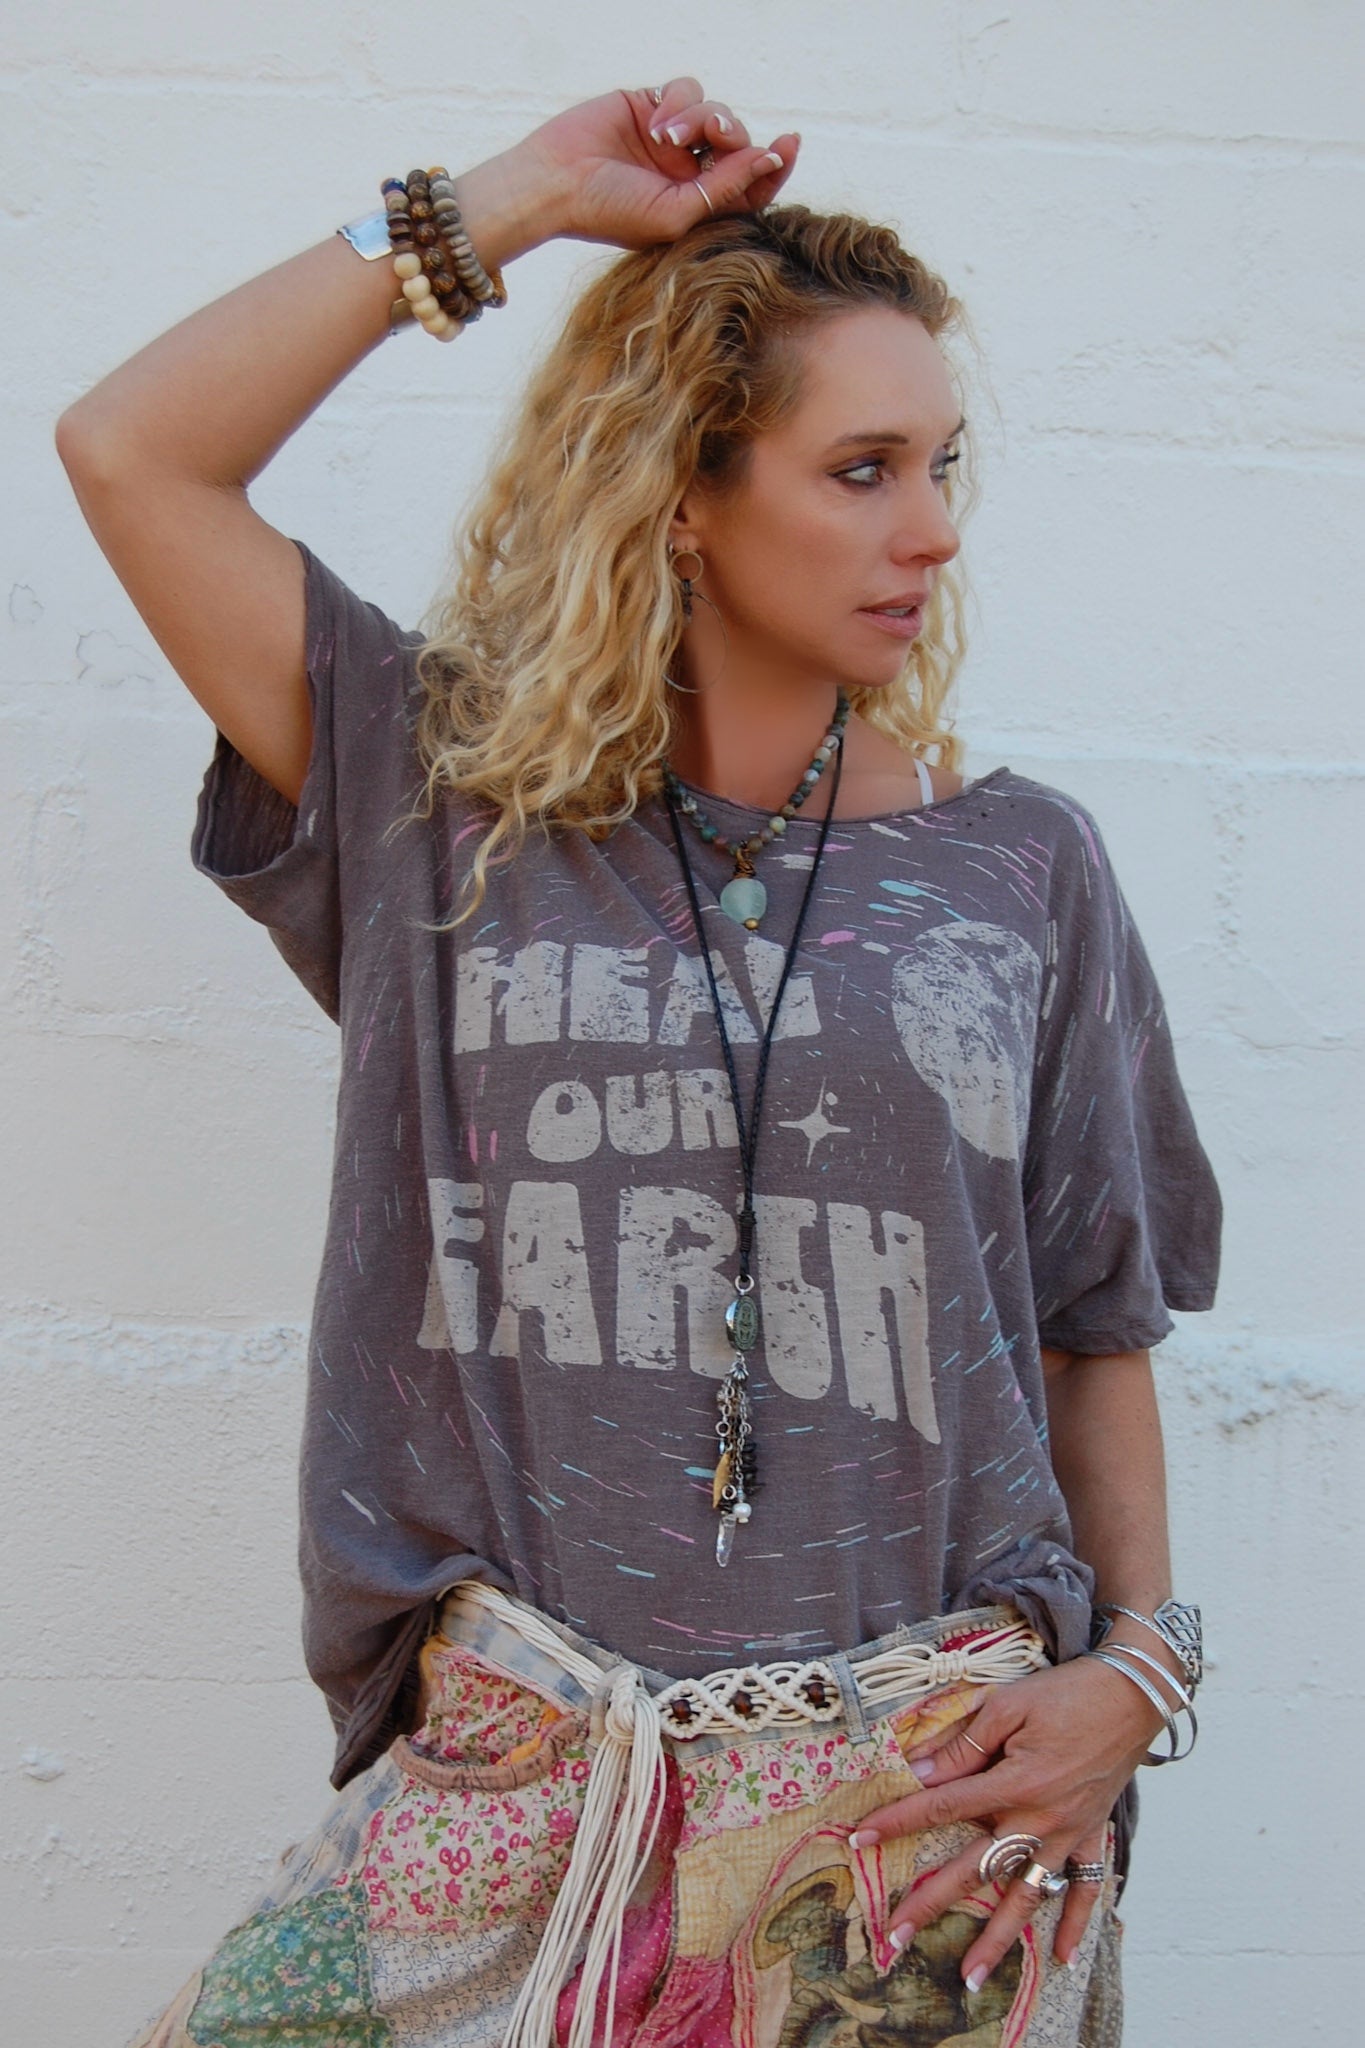 Magnolia Pearl Heal Our Earth T in Ozzy